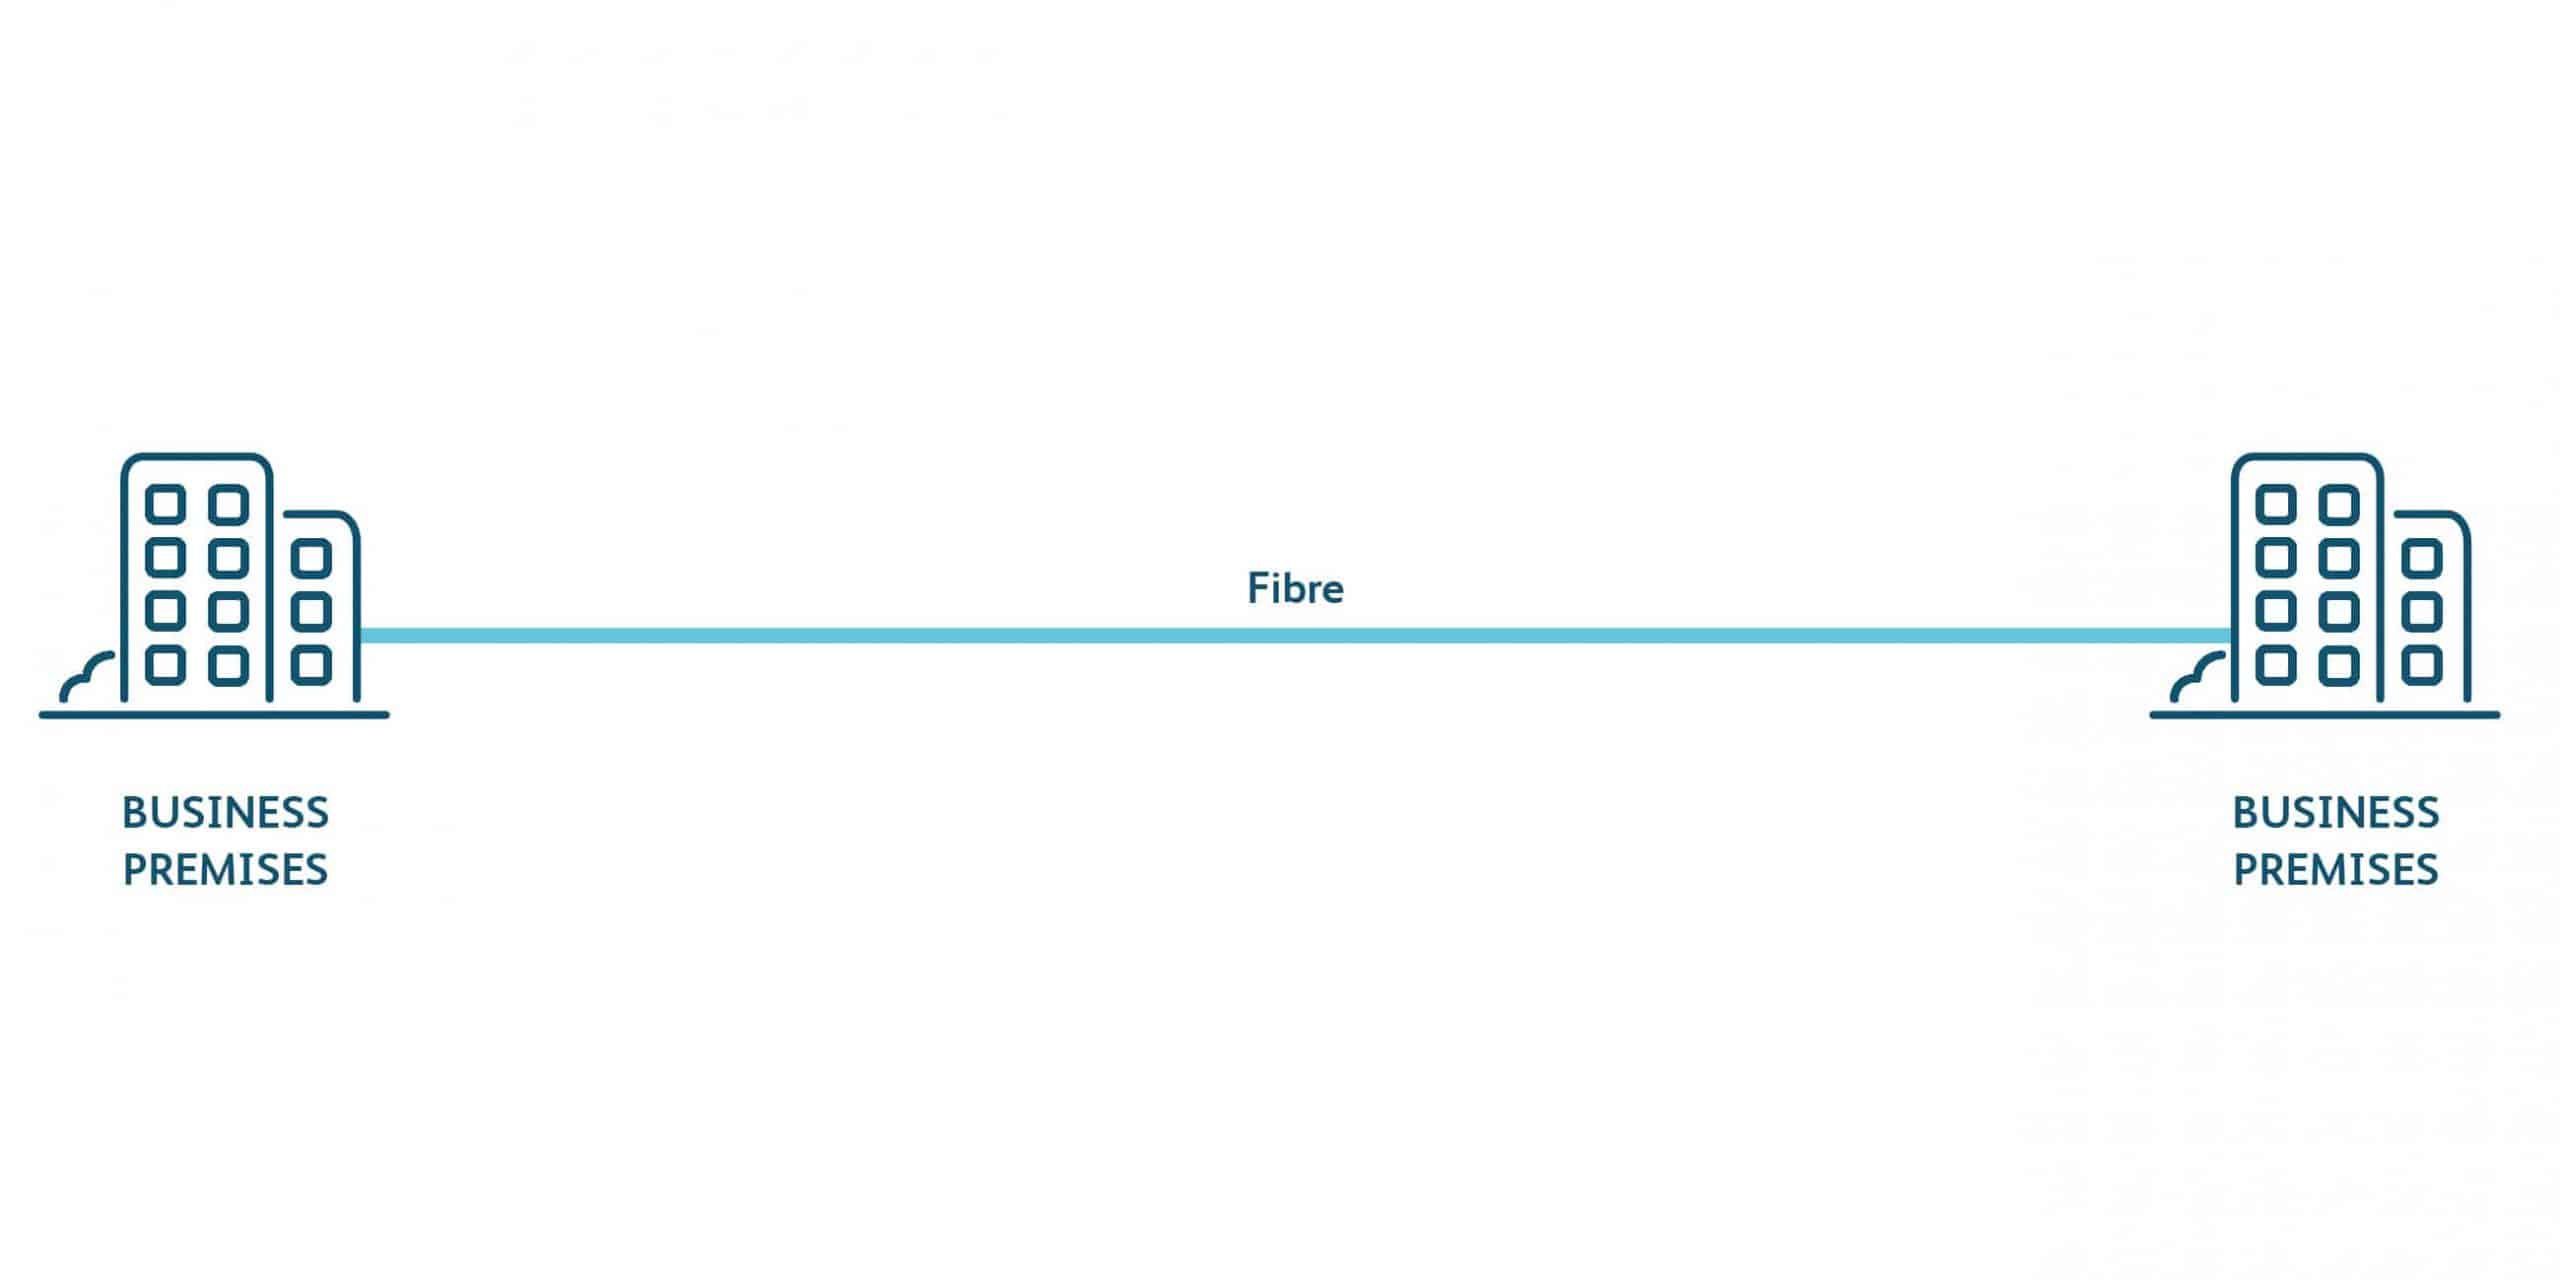 How point to point fibre works